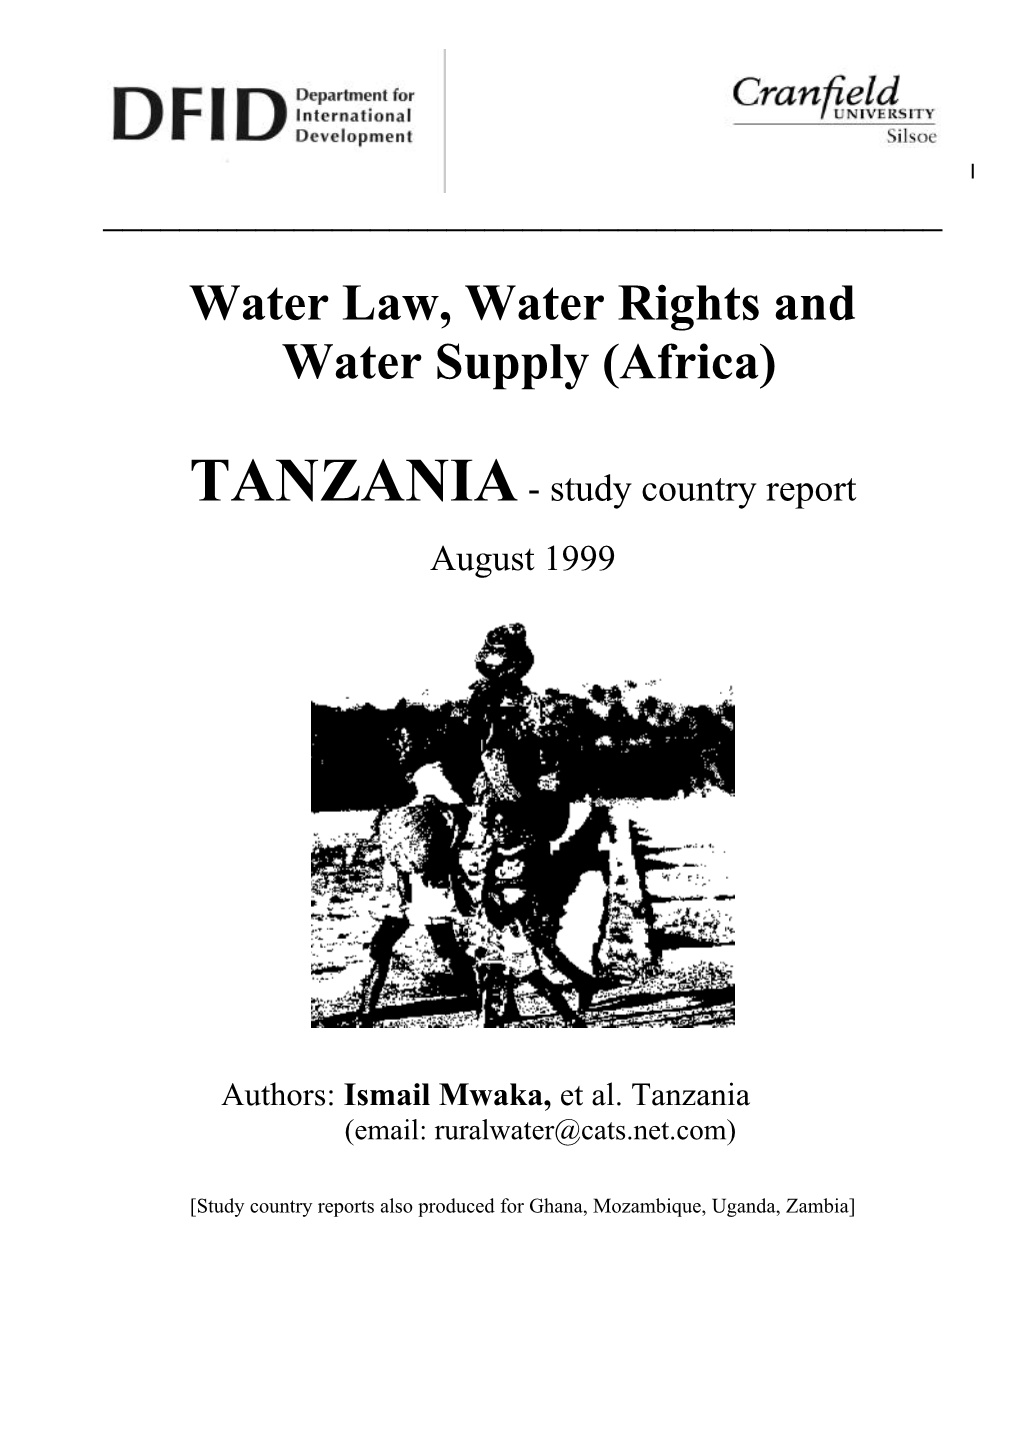 Water Law, Water Rights and Water Supply (Africa)